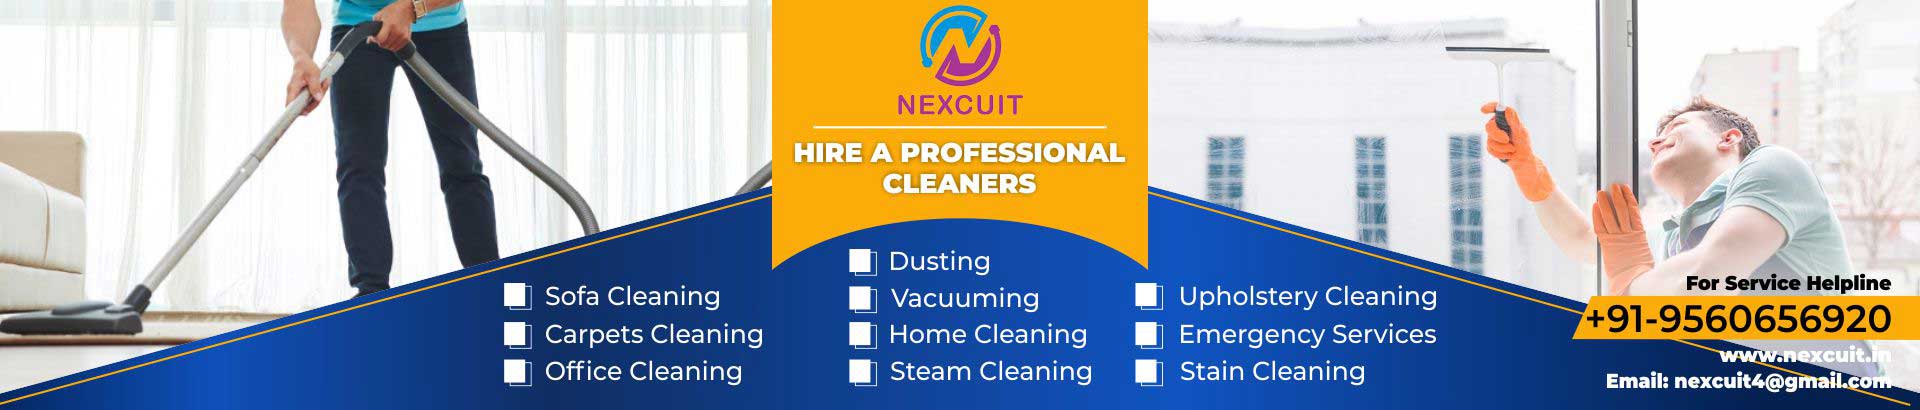 Sofa Cleaning Services In Delhi 